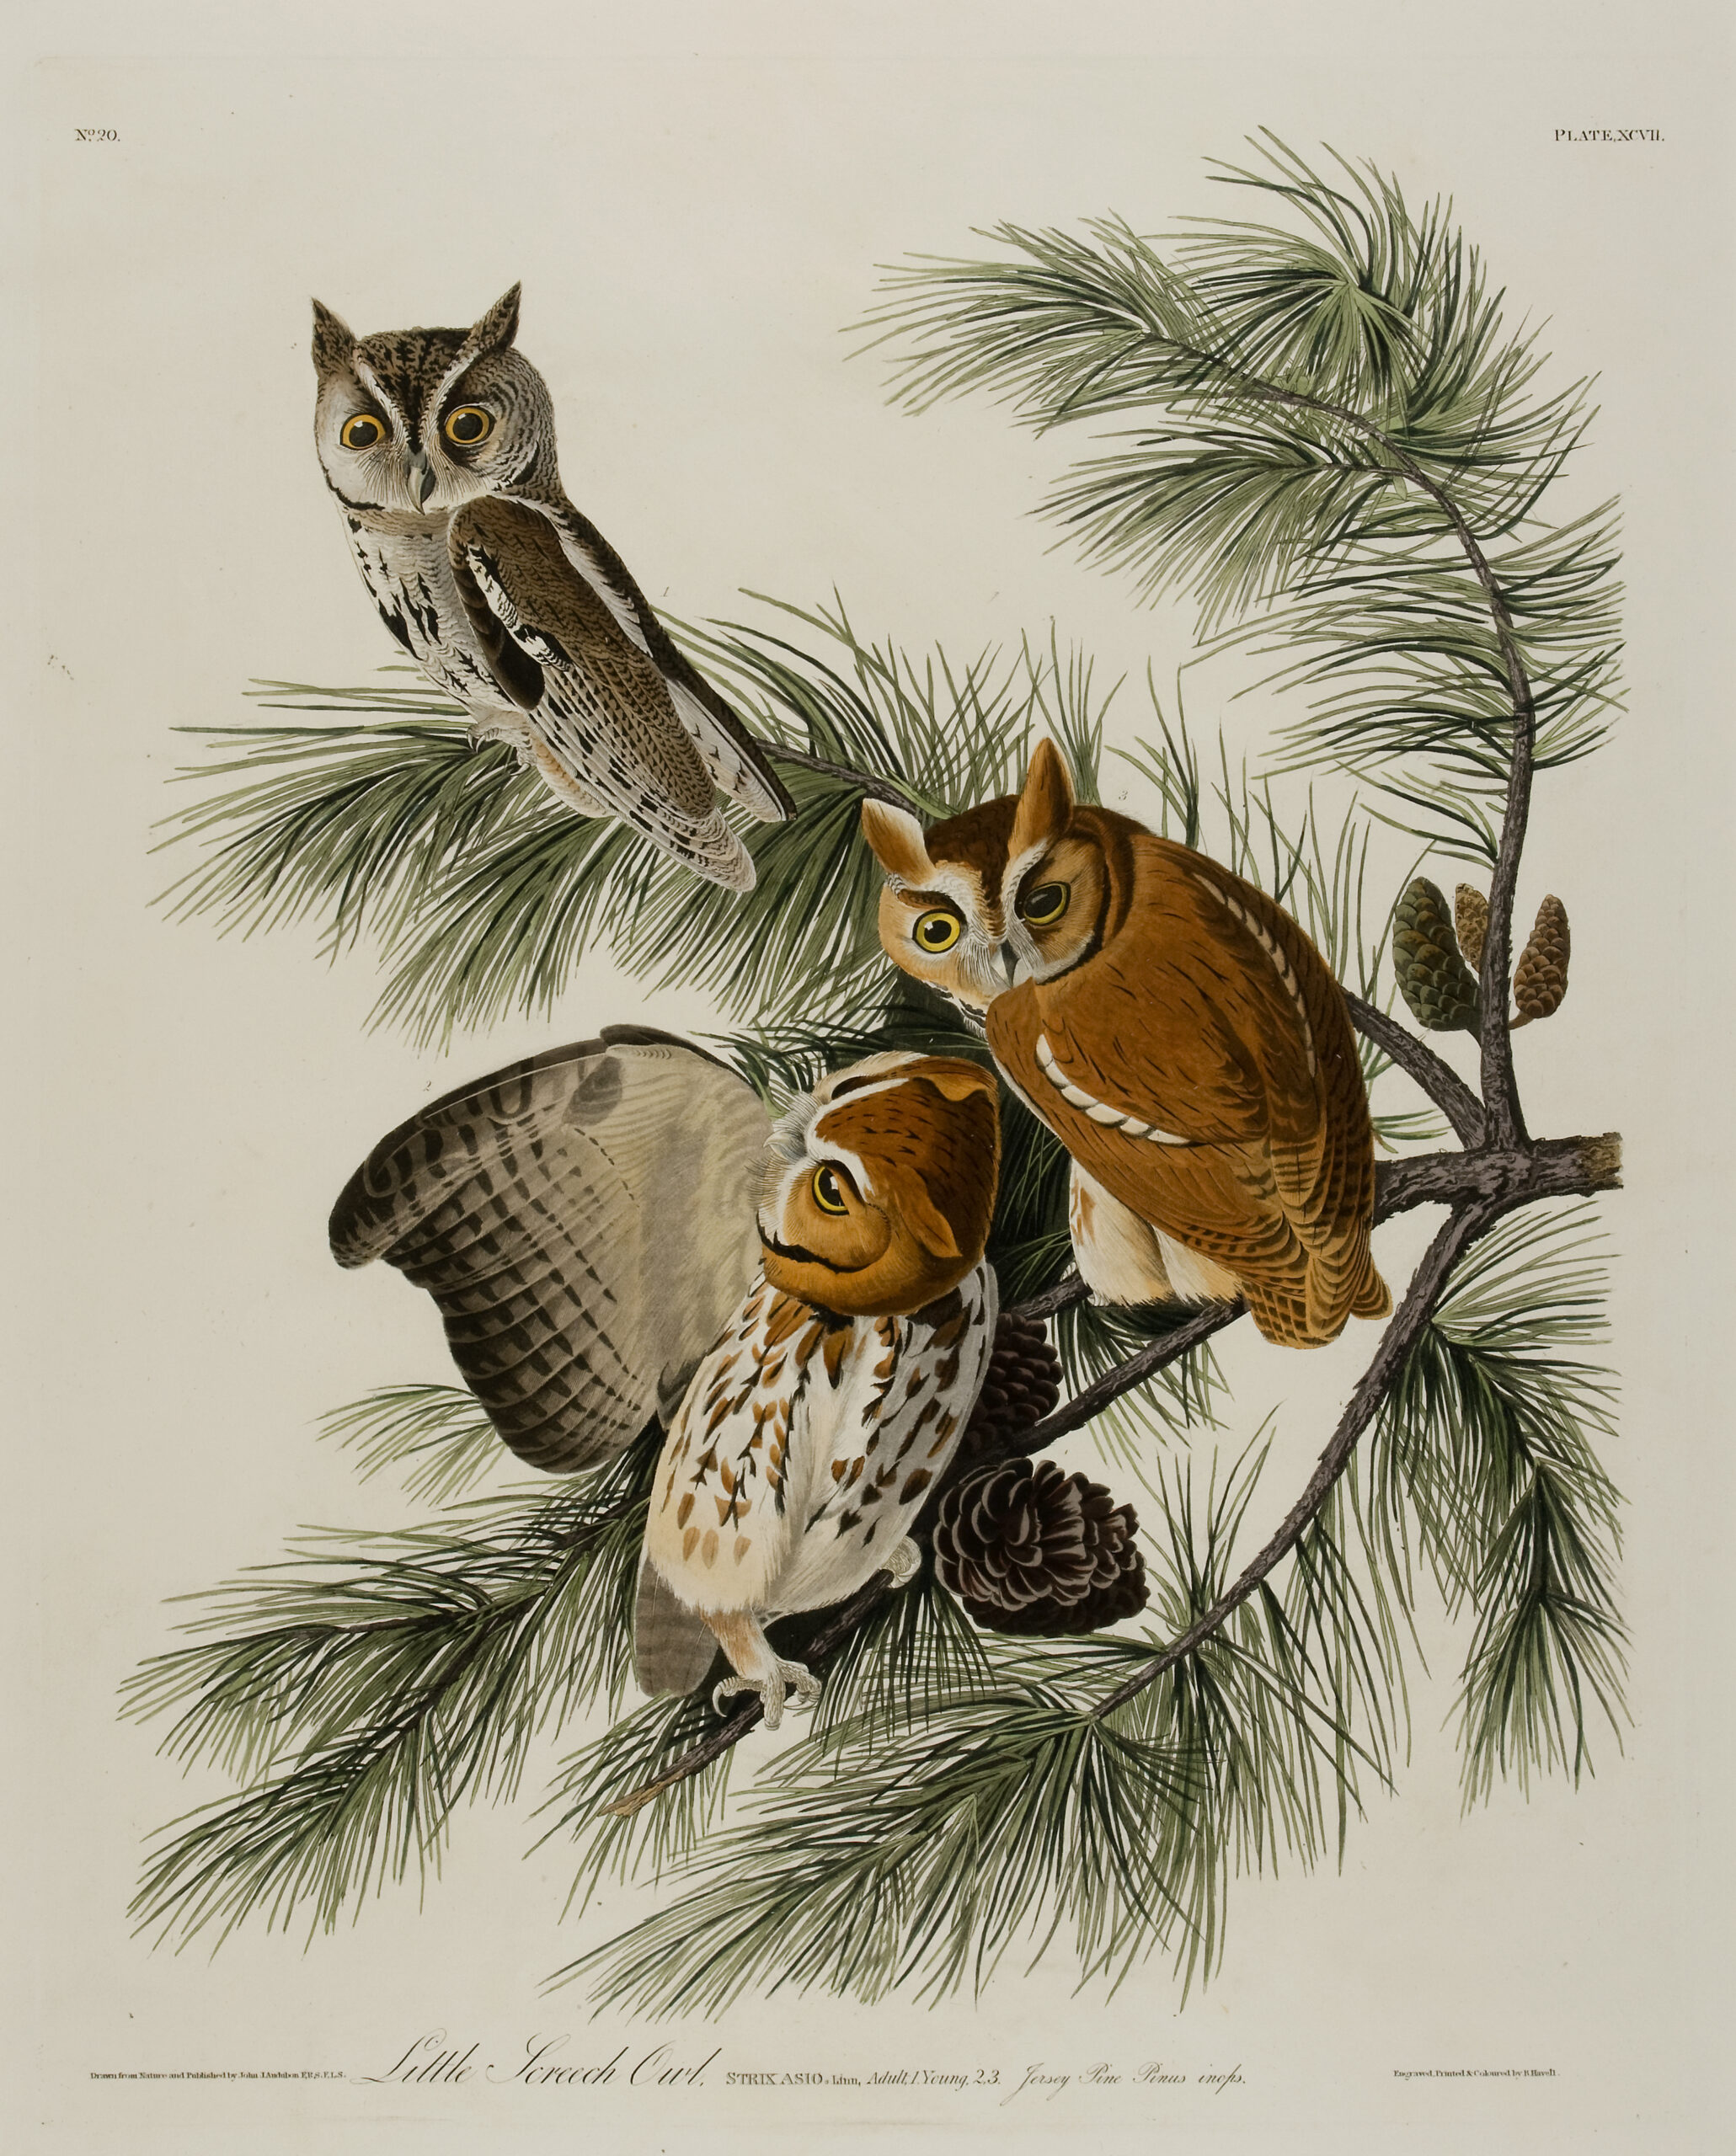 Two orange owls sit on tree branches. One has its wings spread. Another brown owl sits above them.